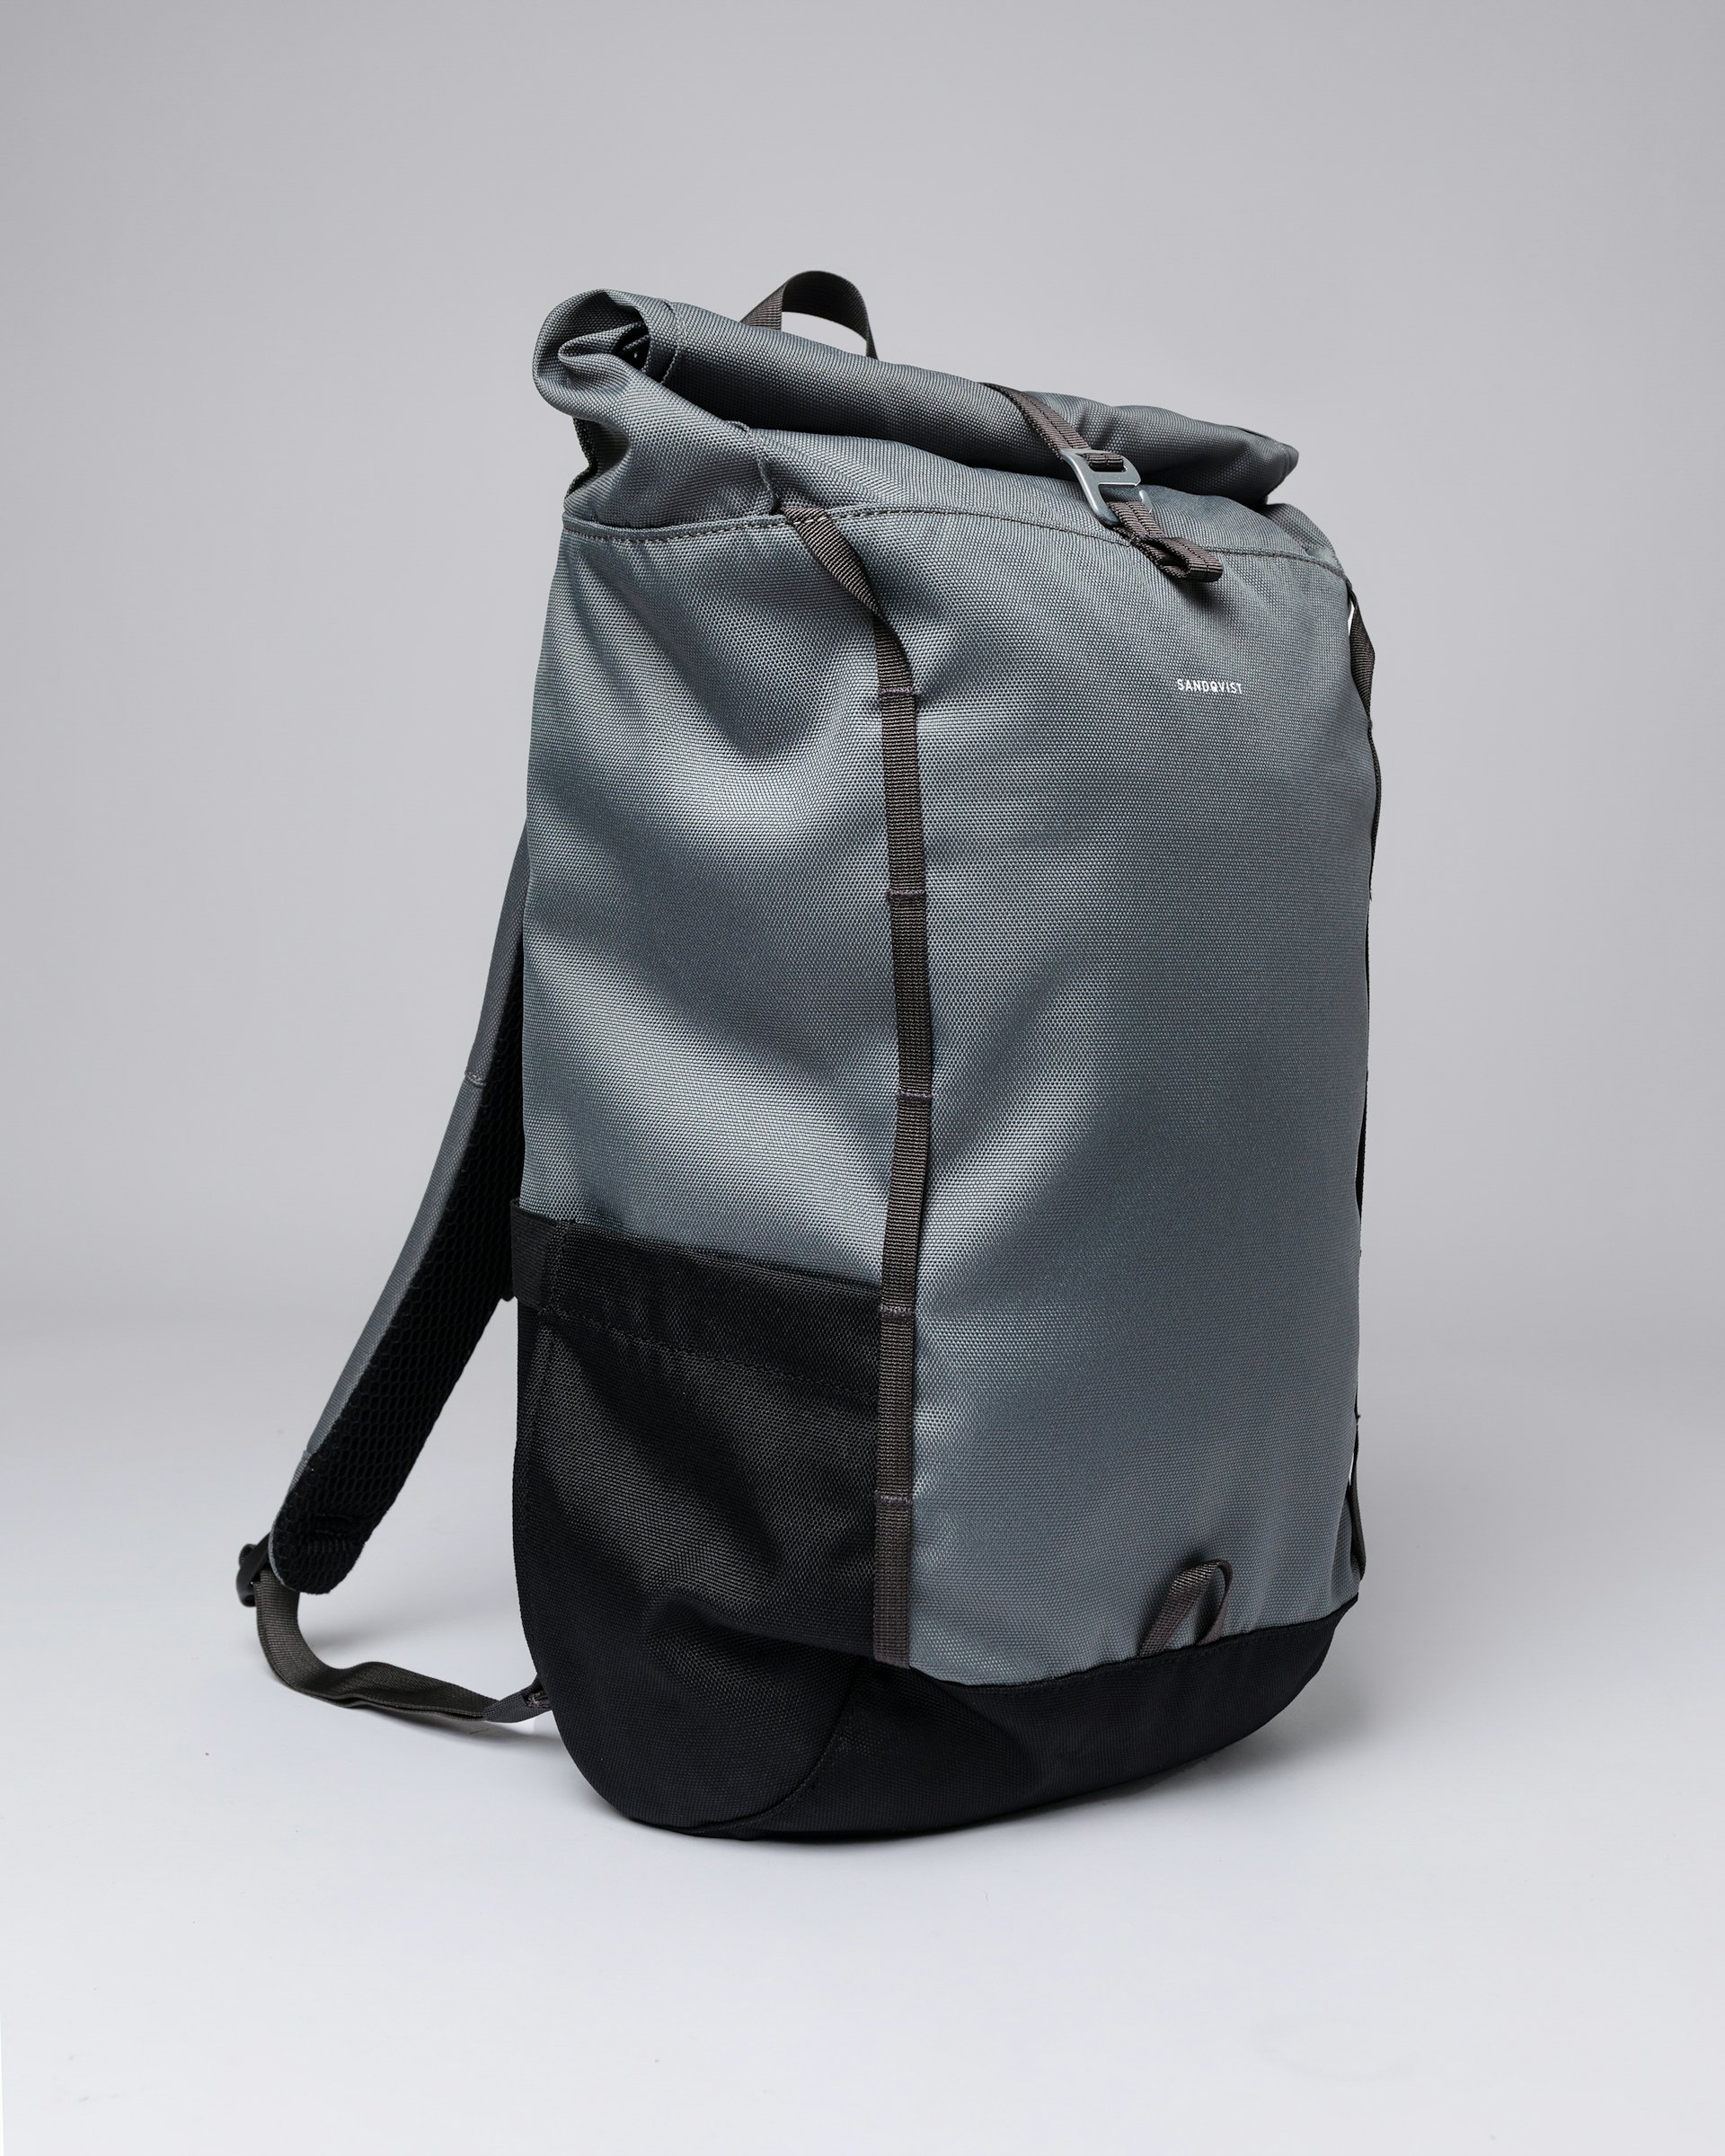 Arvid belongs to the category Backpacks and is in color night grey & black (4 of 5)